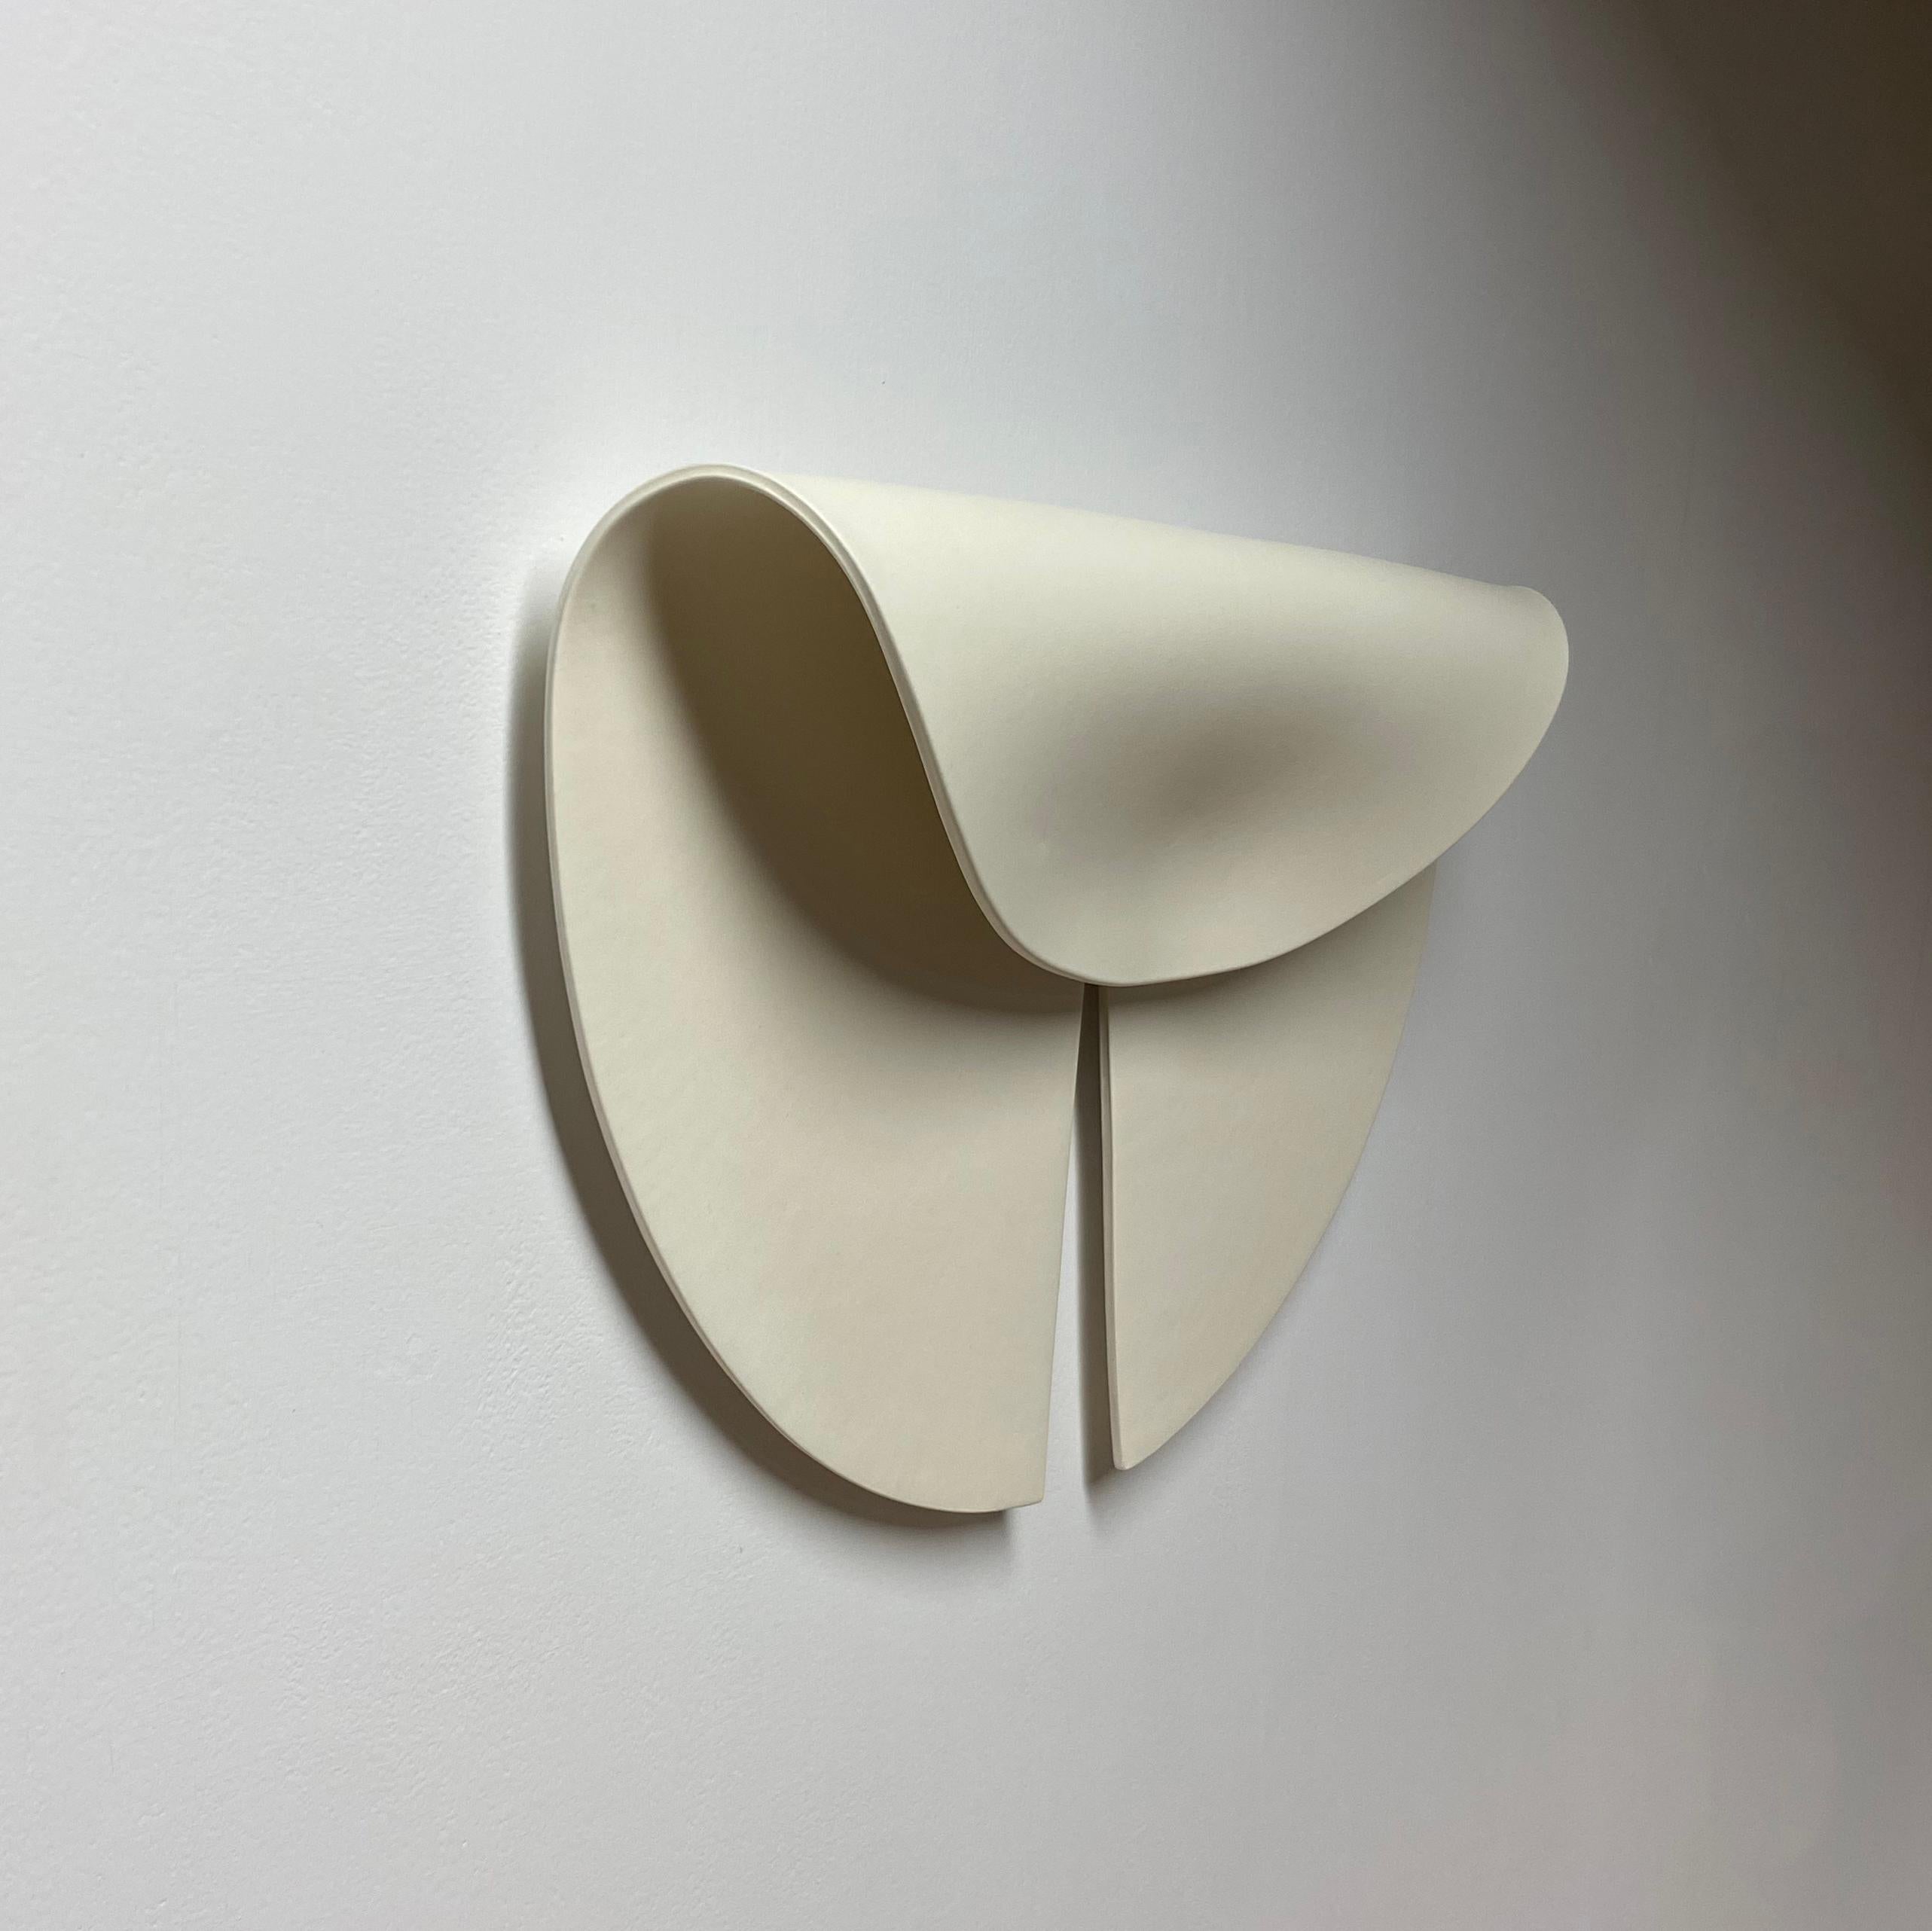 North American Ceramic Wall Sculpture: 'Leaf' / By Olivia Barry For Sale